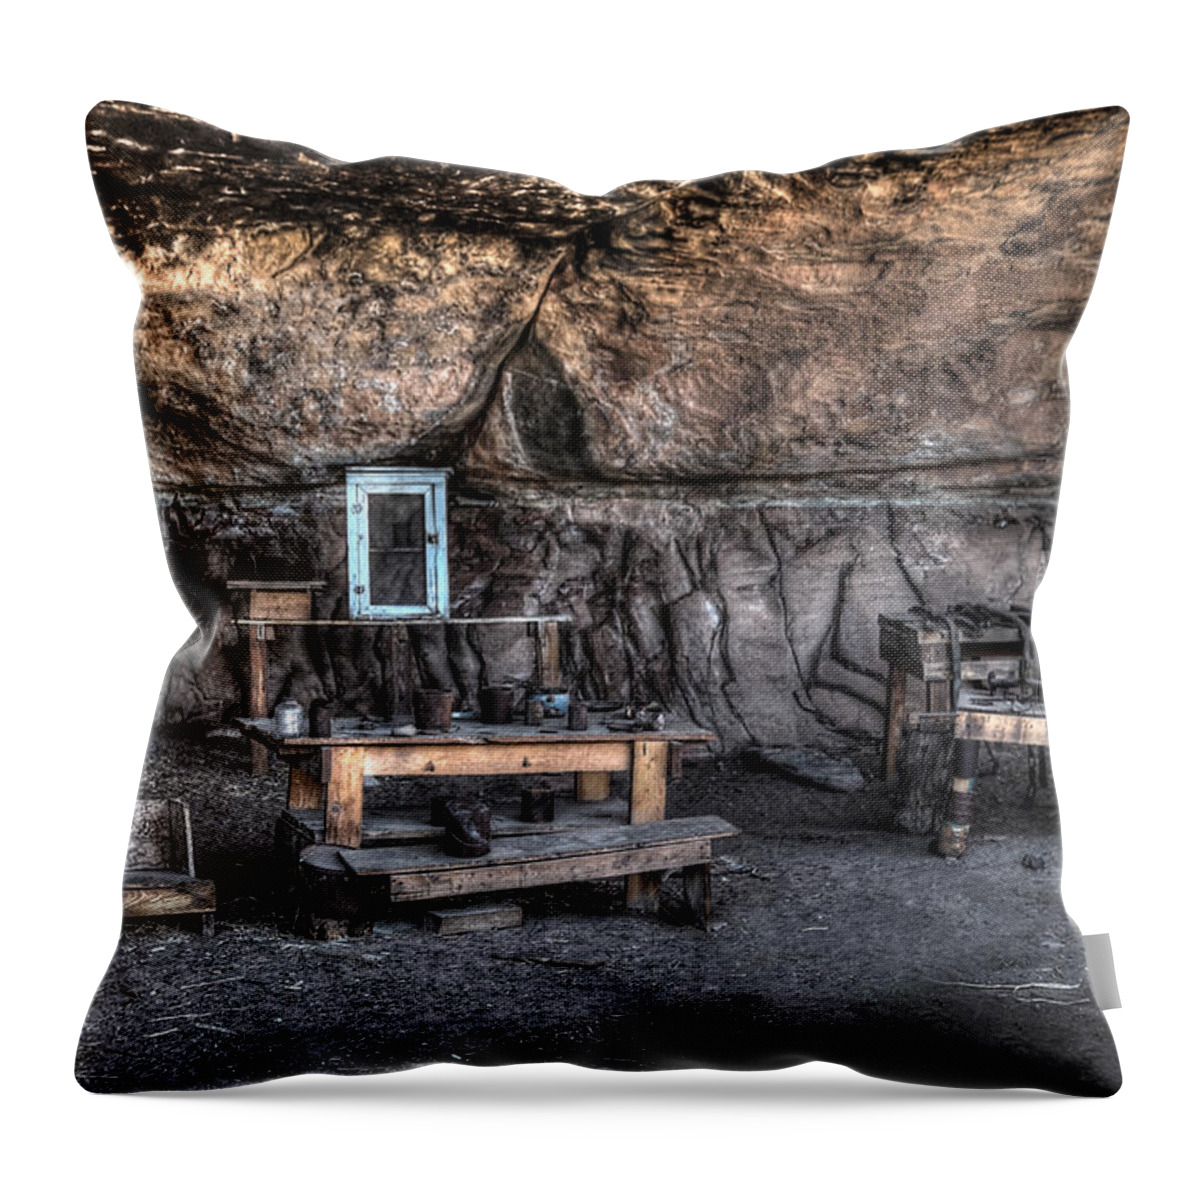 Photograph Throw Pillow featuring the photograph Cowboy Camp 1880s by Richard Gehlbach